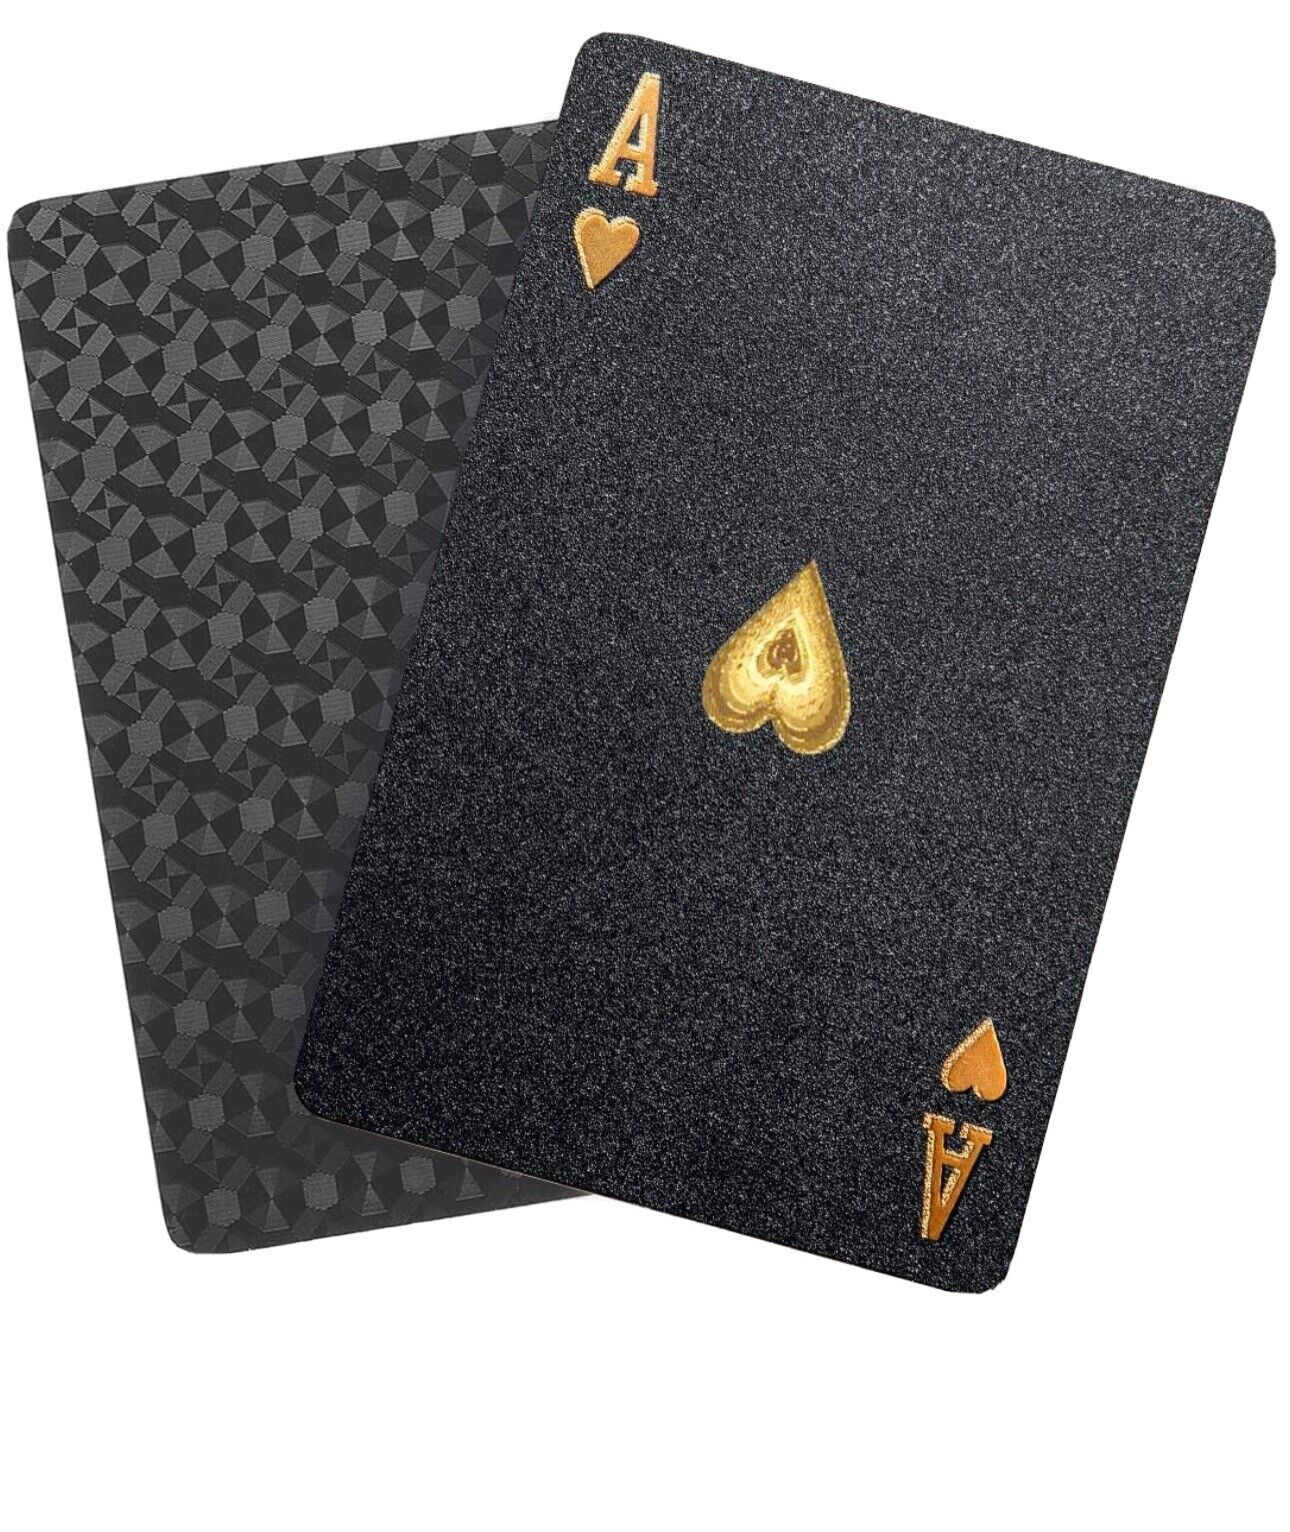 Diamond Waterproof Black Playing Cards Poker Cards HD Deck of Cards ⭐⭐⭐⭐⭐